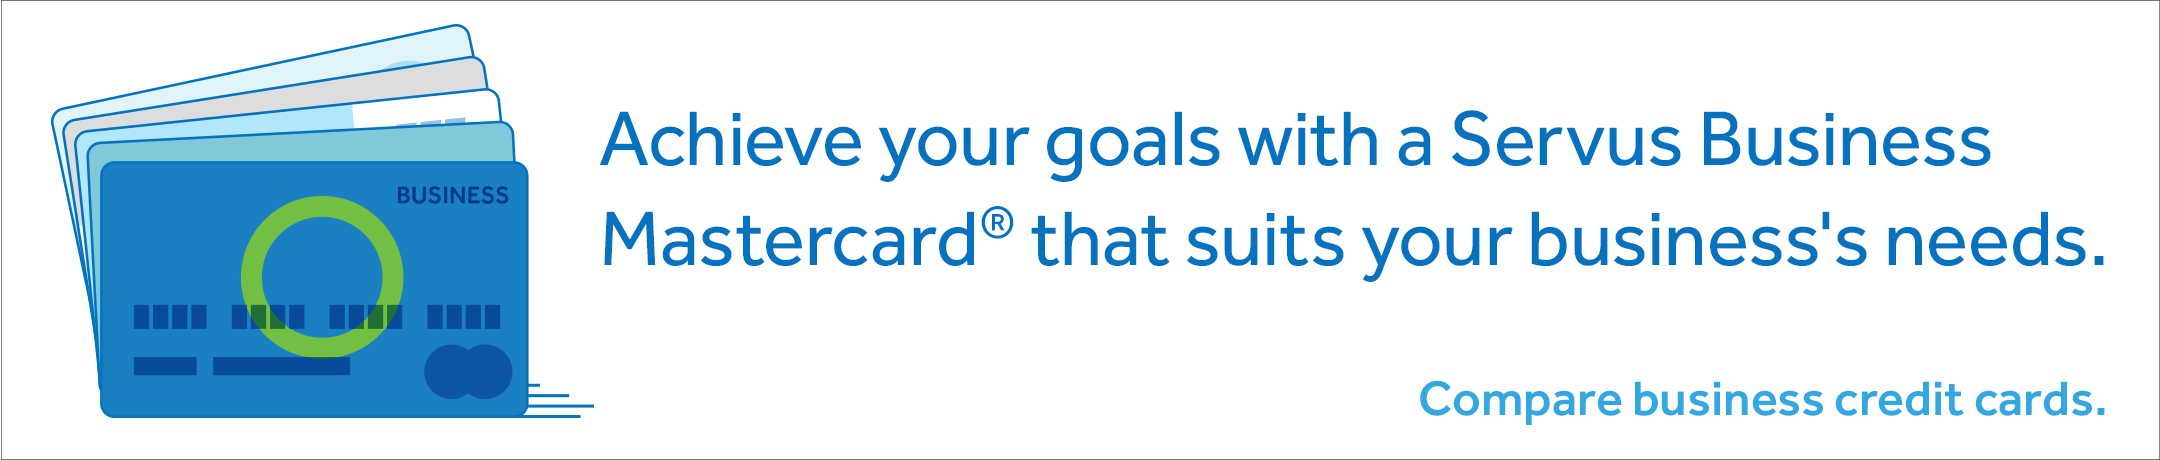 Achieve your goals with a Servus Business Mastercard that suits your business's needs. Compare business credit cards.